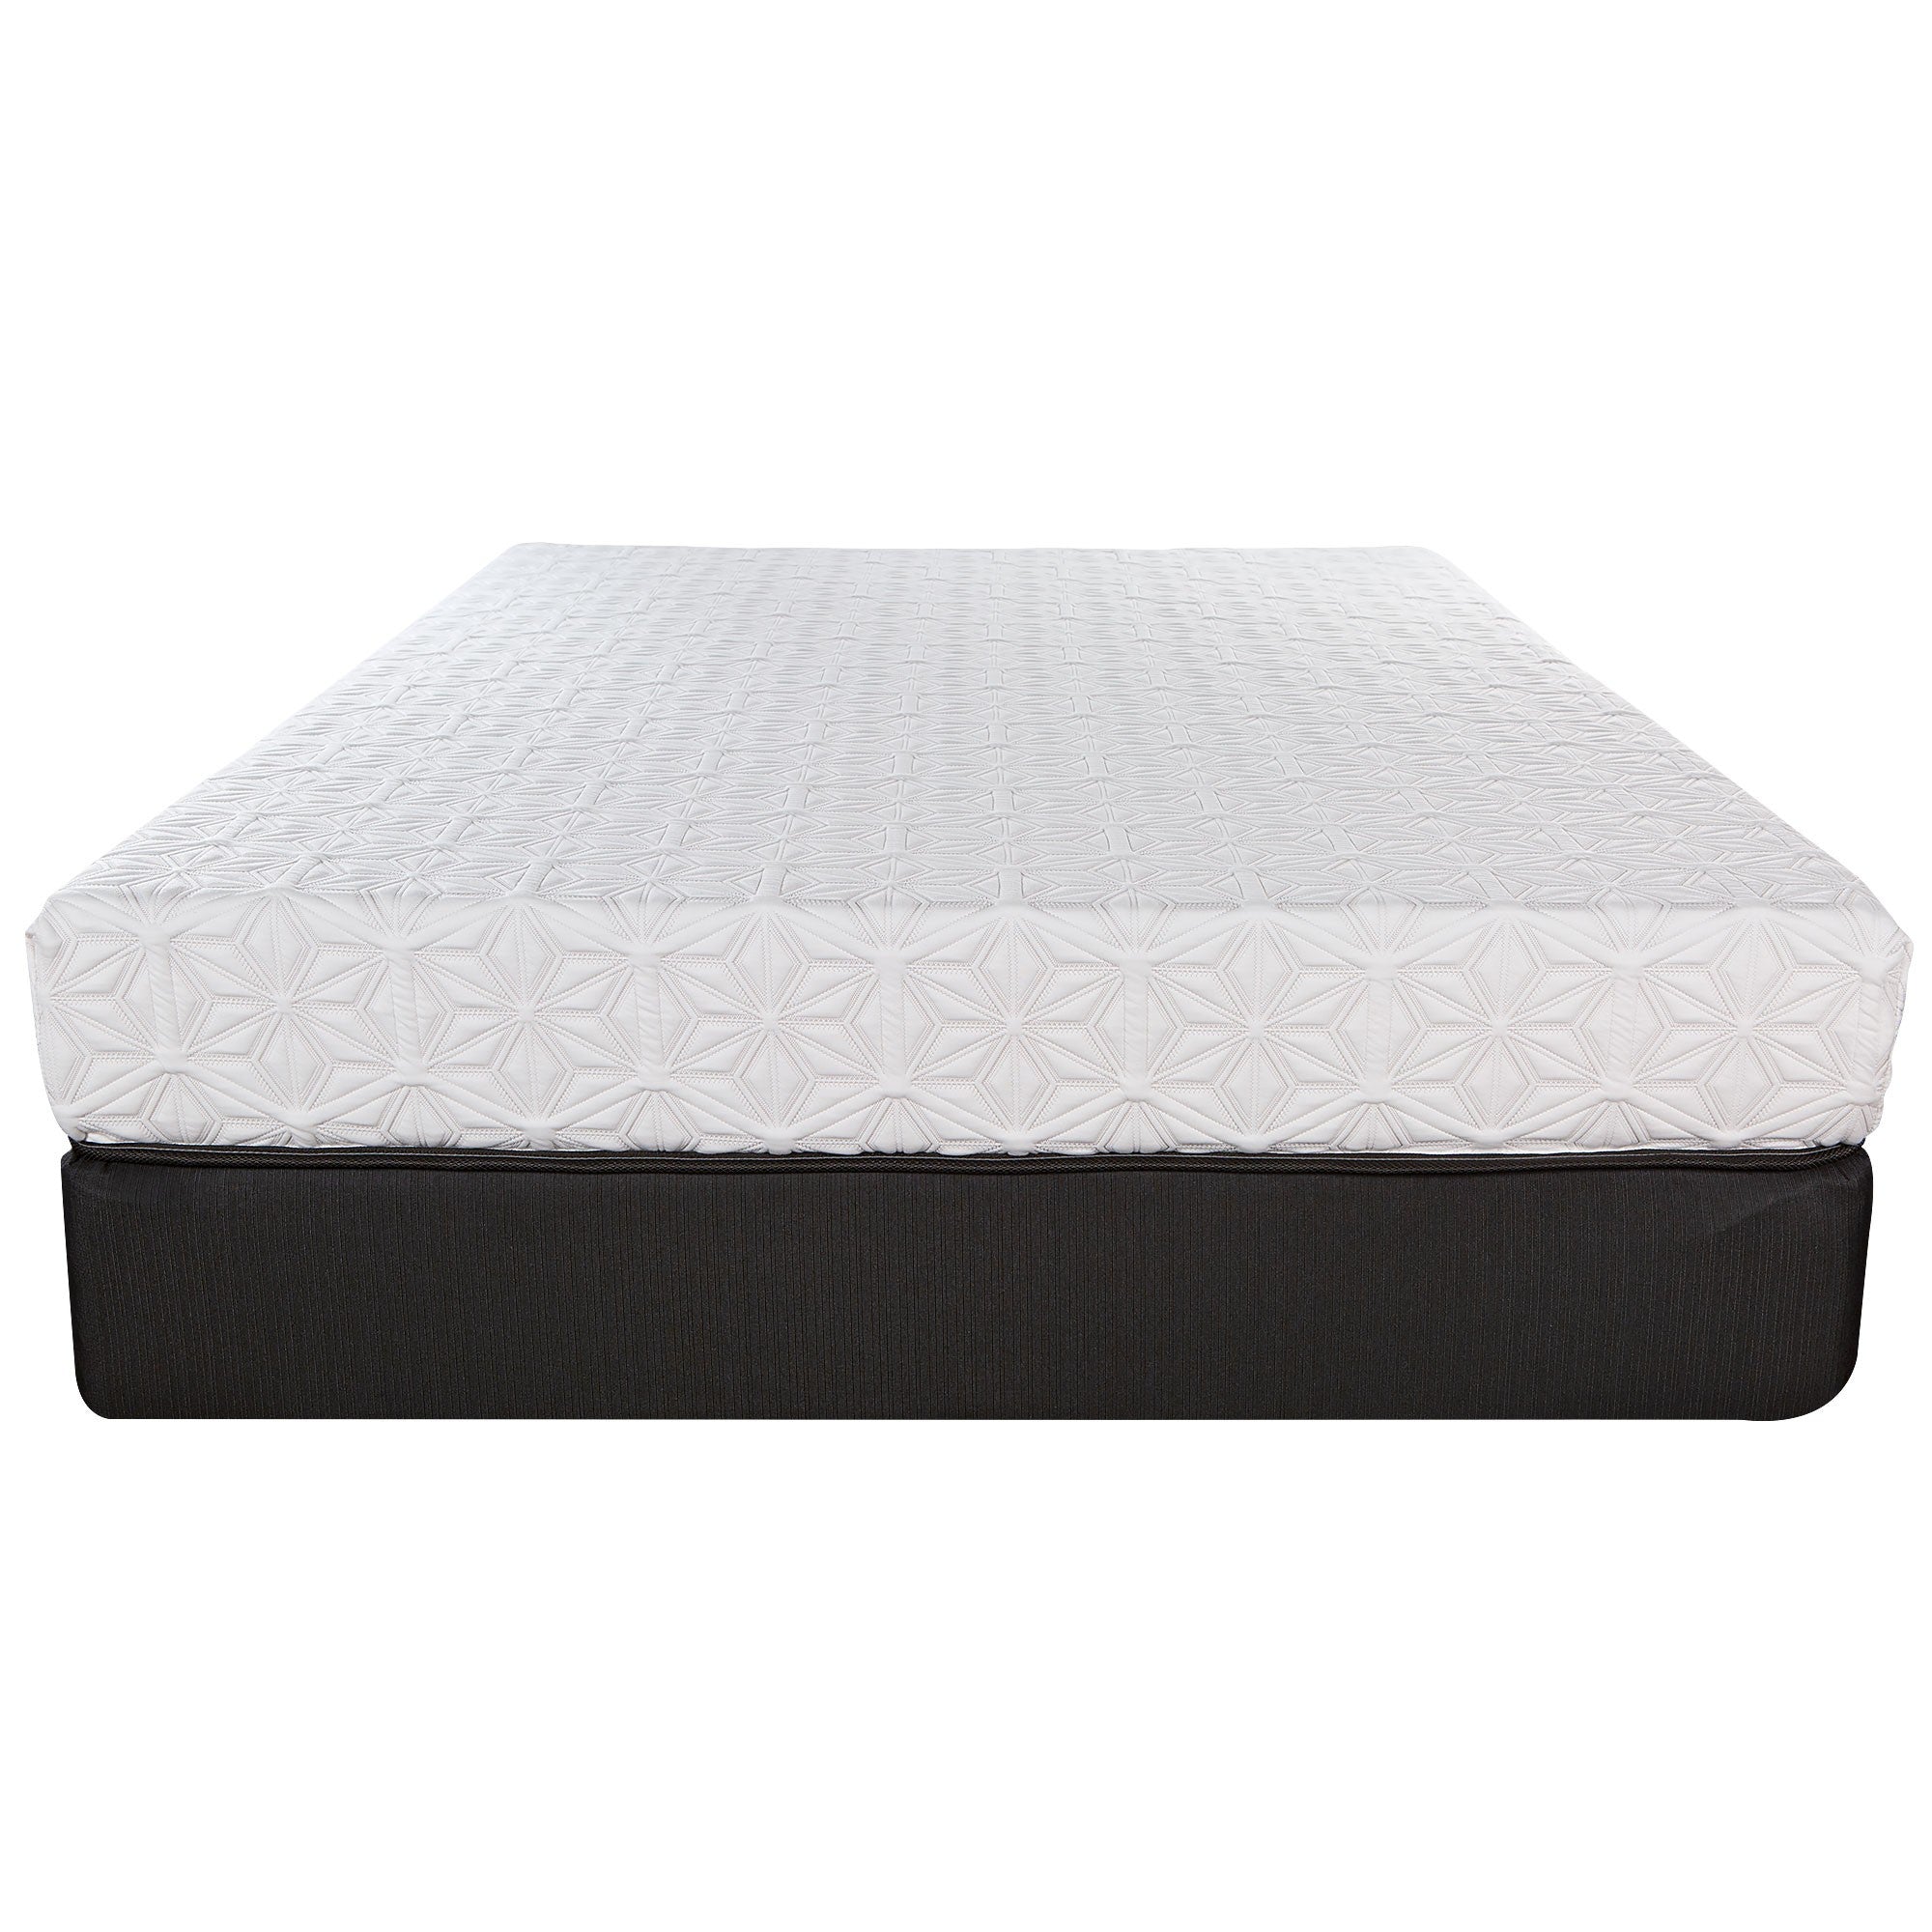 8 Inch Luxury Plush Gel Infused Memory Foam and HD Support Foam Smooth Top Mattress